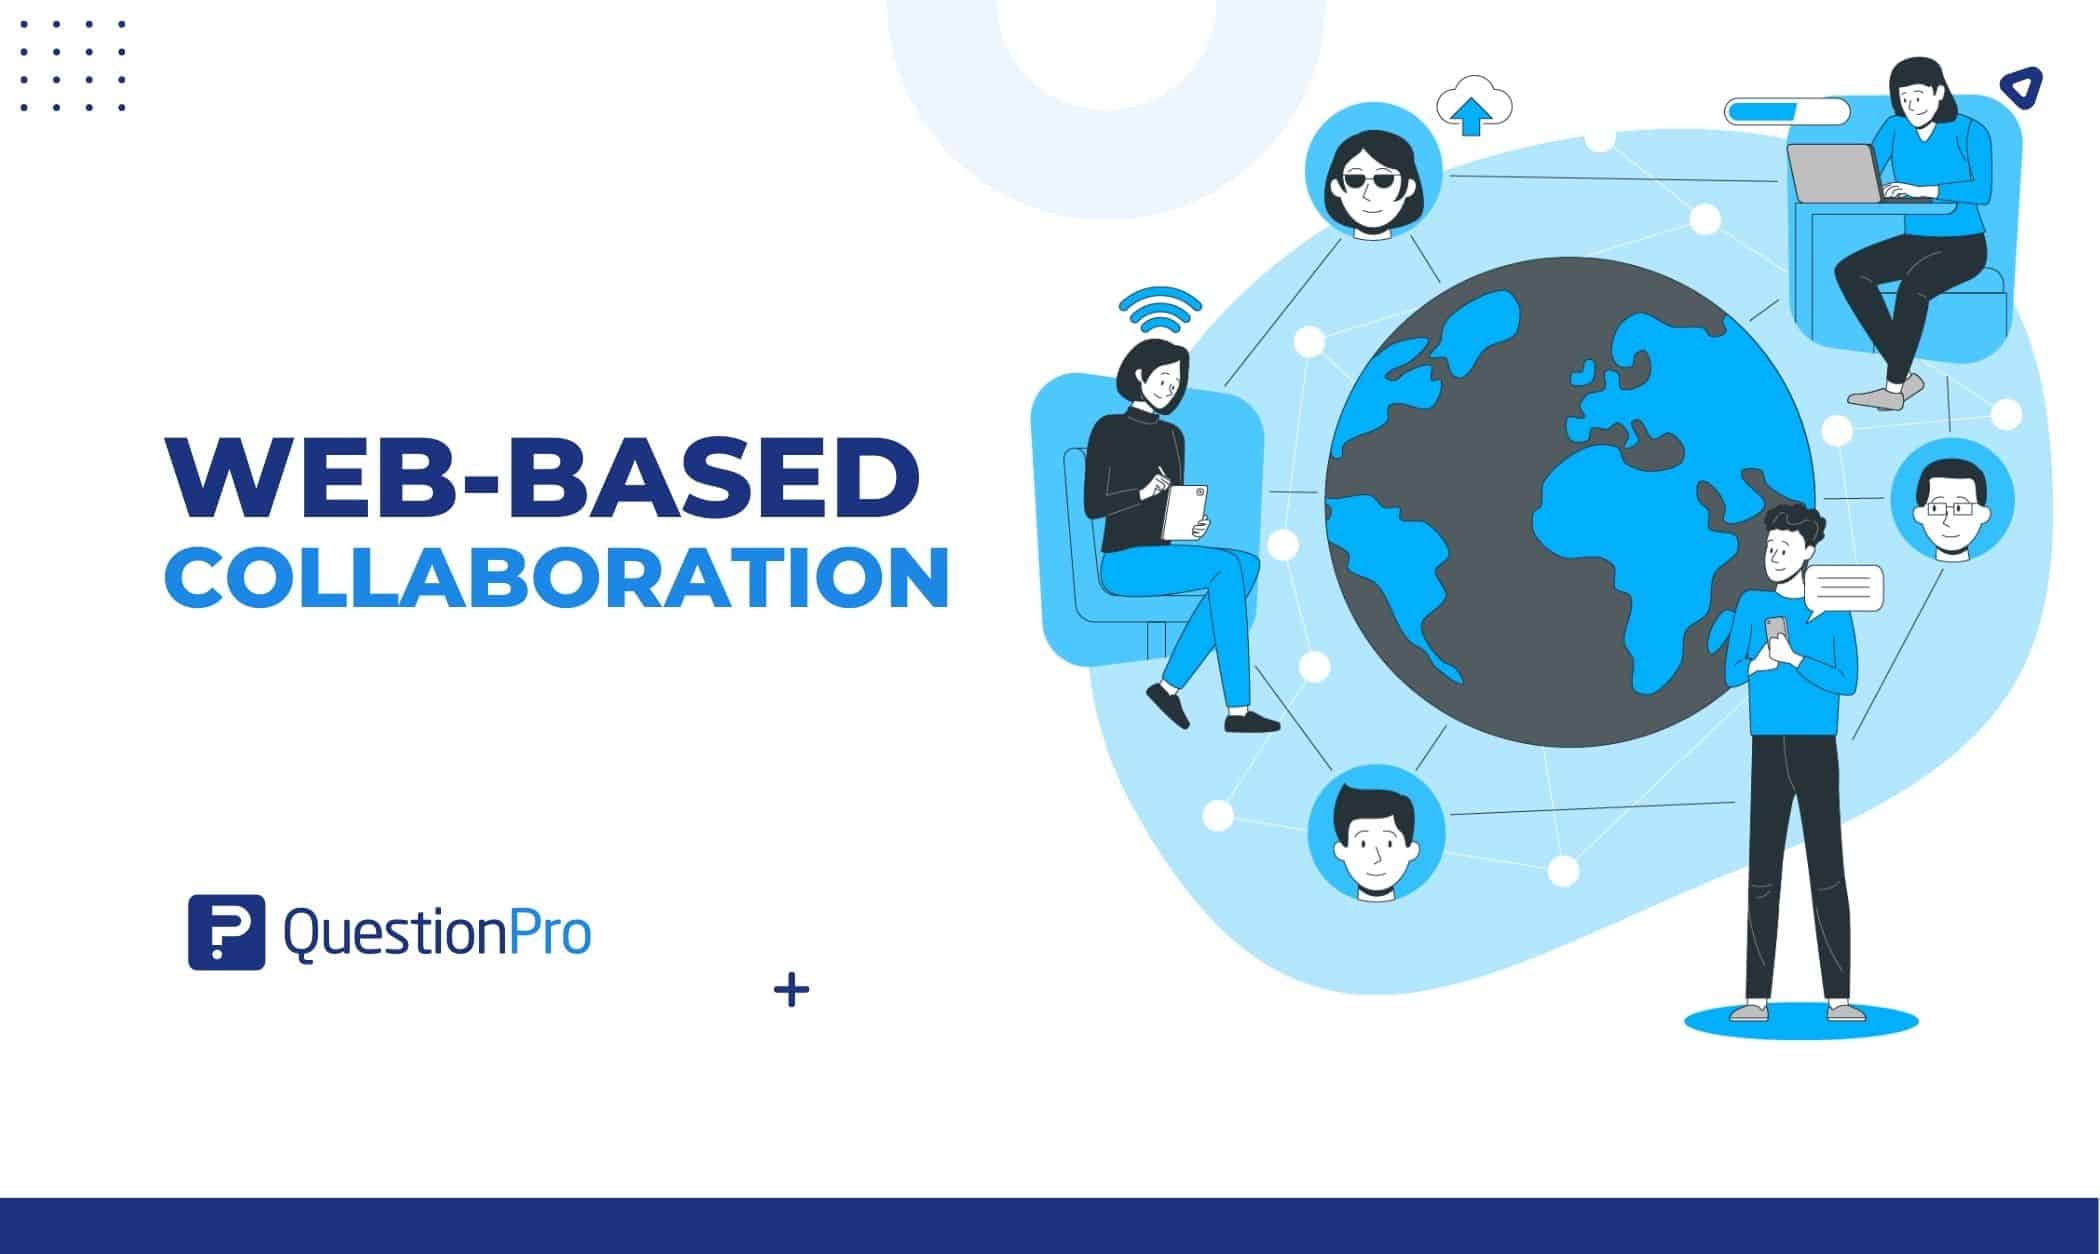 Web-based collaboration involves collaborating and communicating online. It allows employees to work remotely, which can boost productivity.